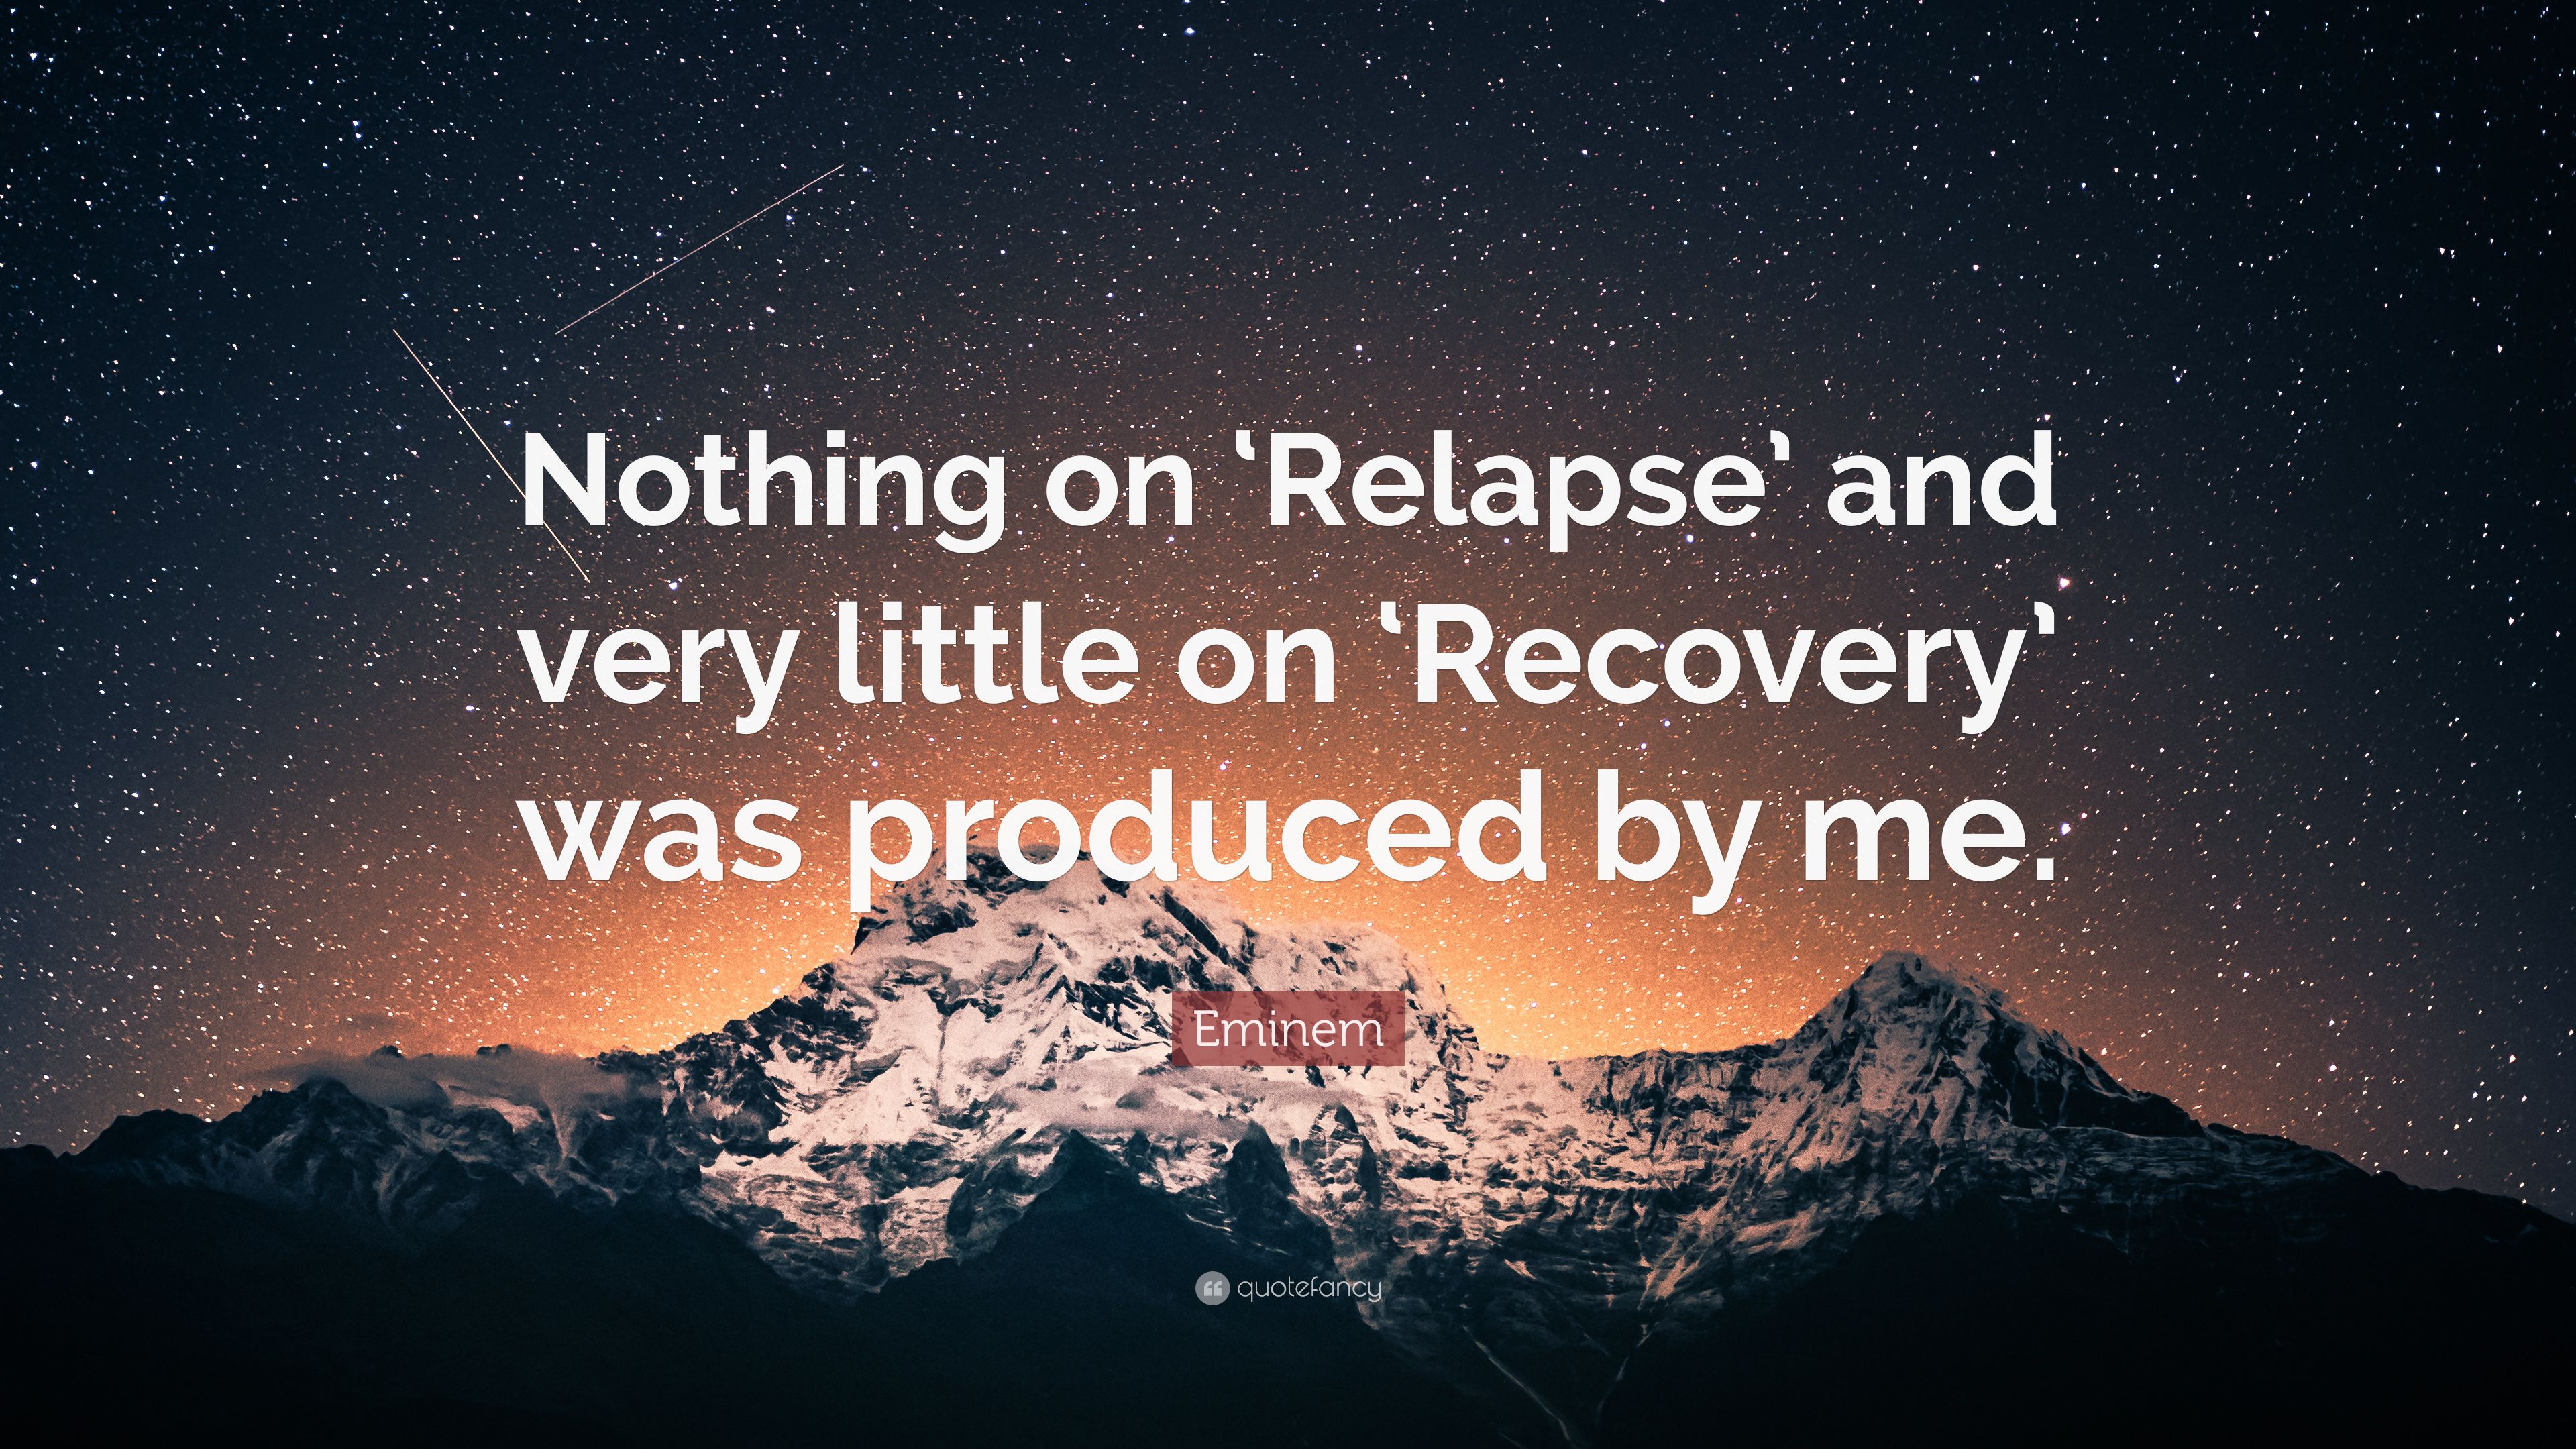 Eminem Quote: “Nothing on 'Relapse' and very little on 'Recovery